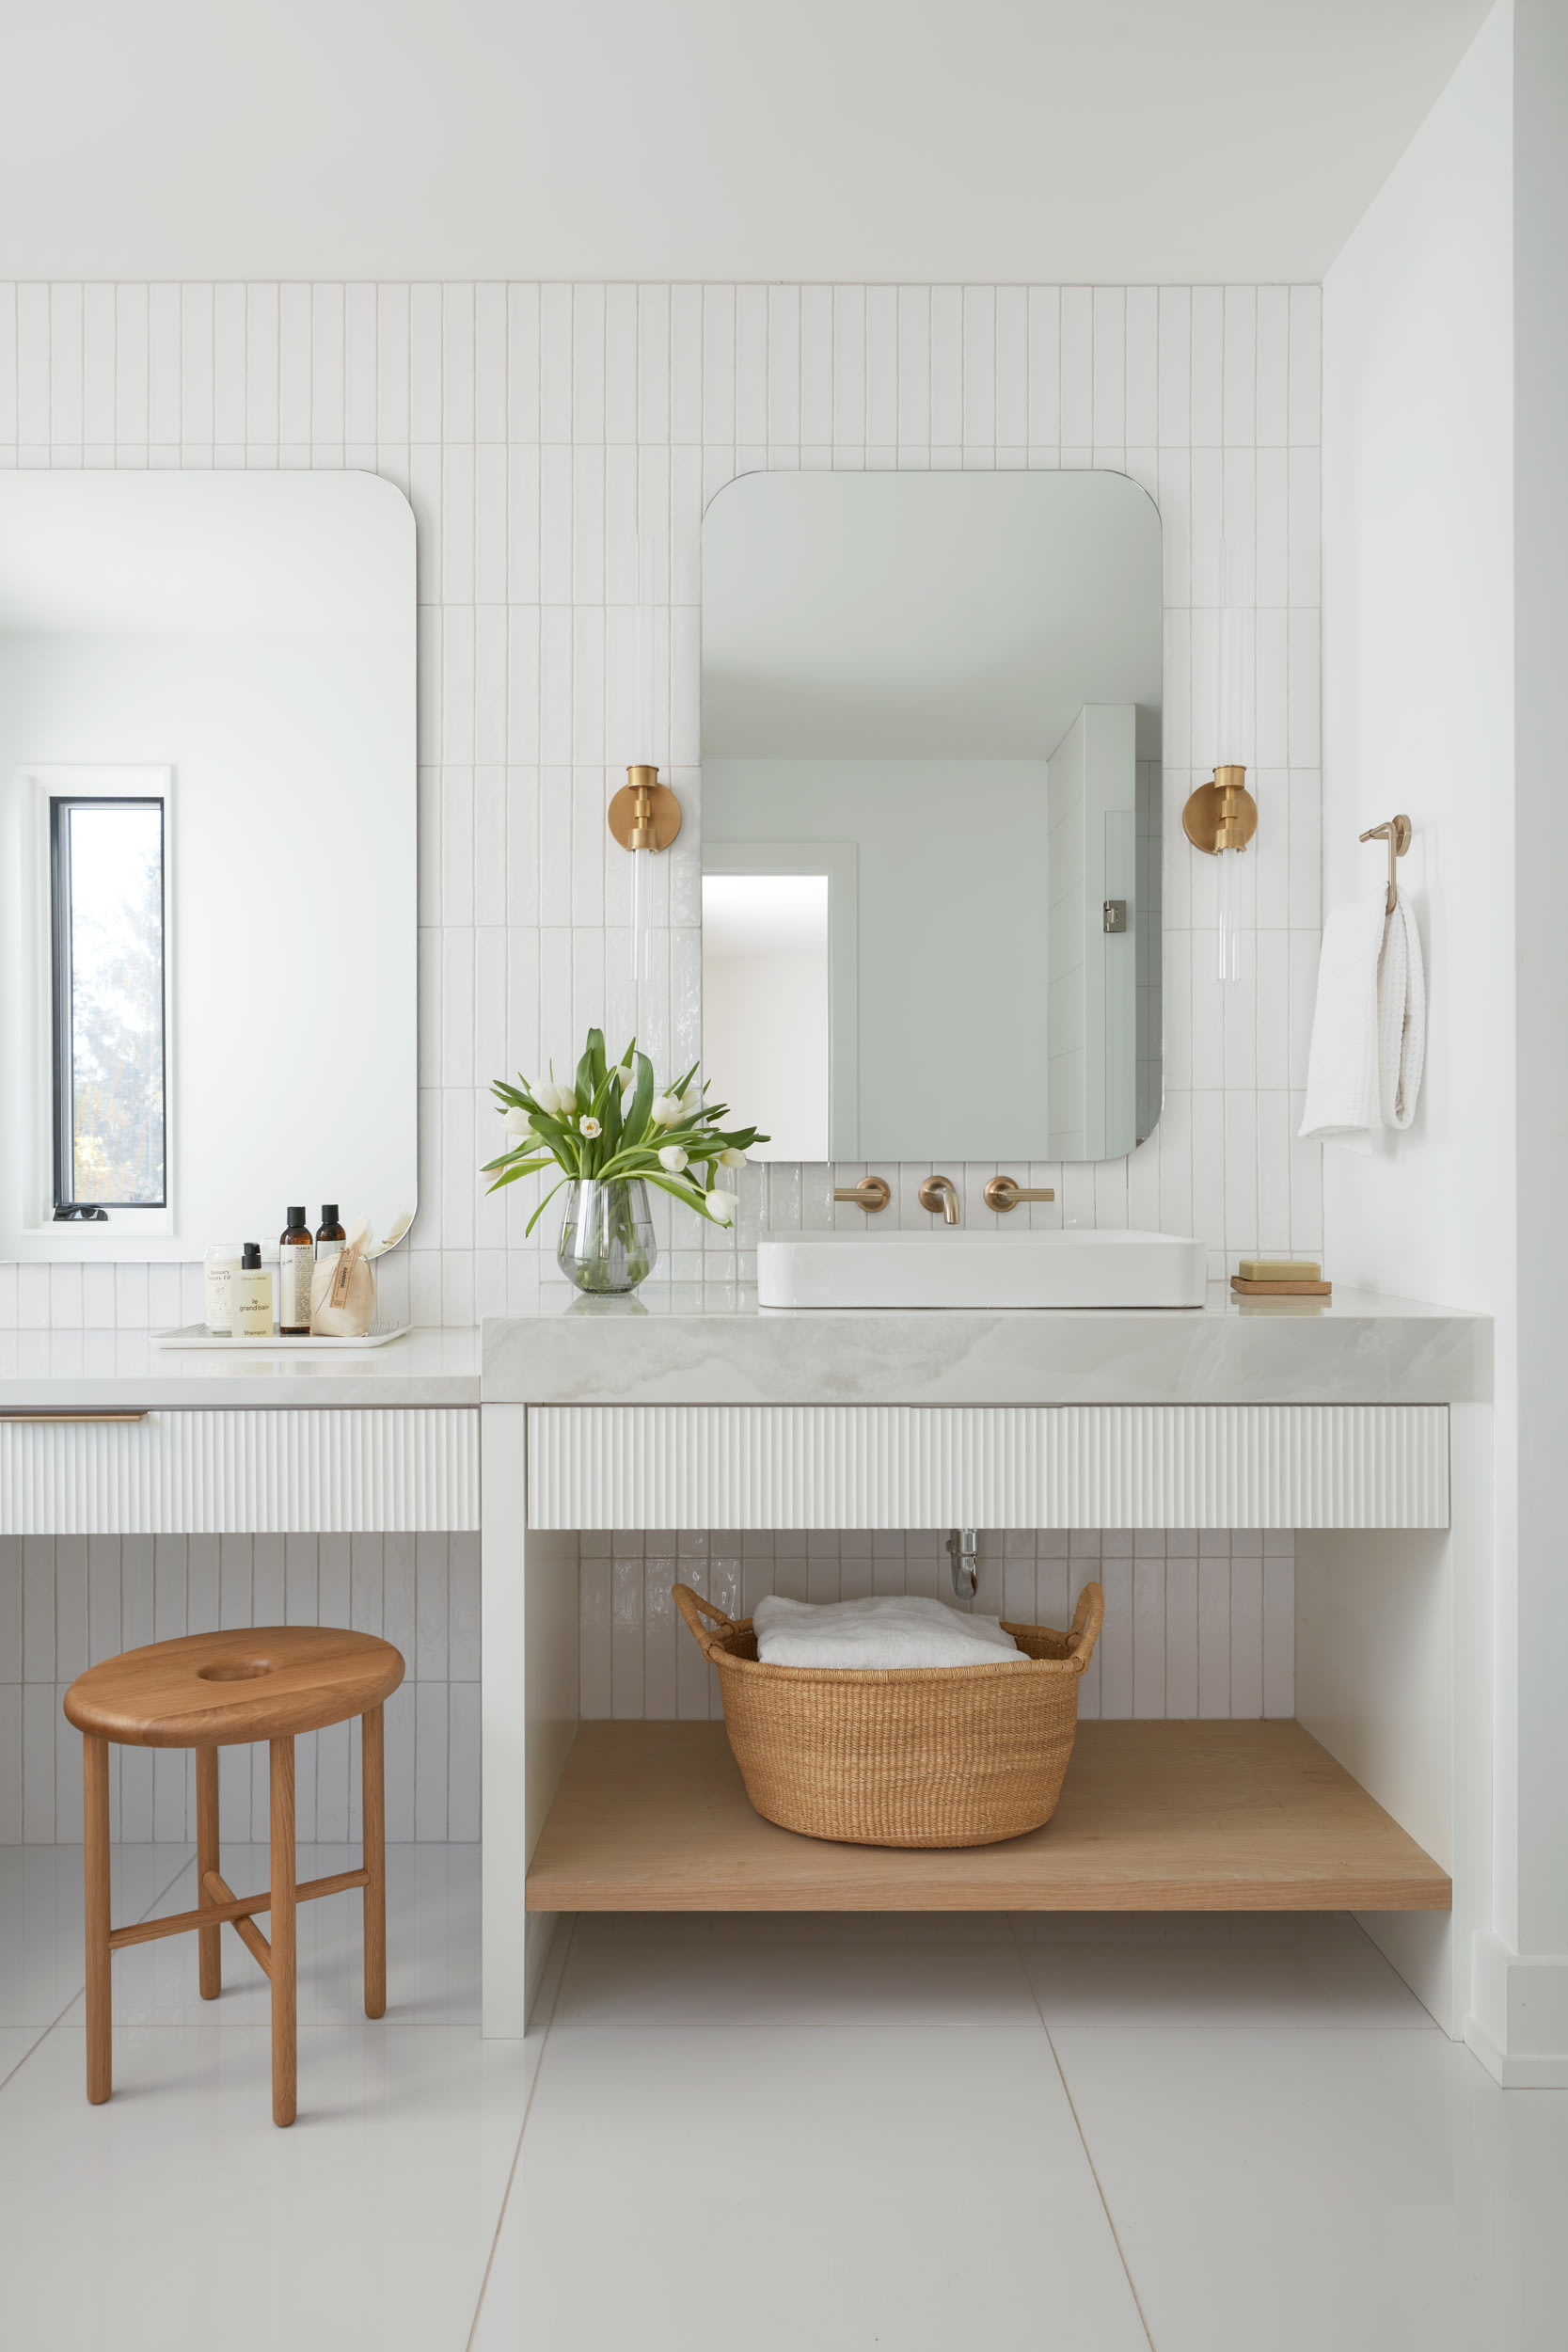 A chic vanity with white fluted doors